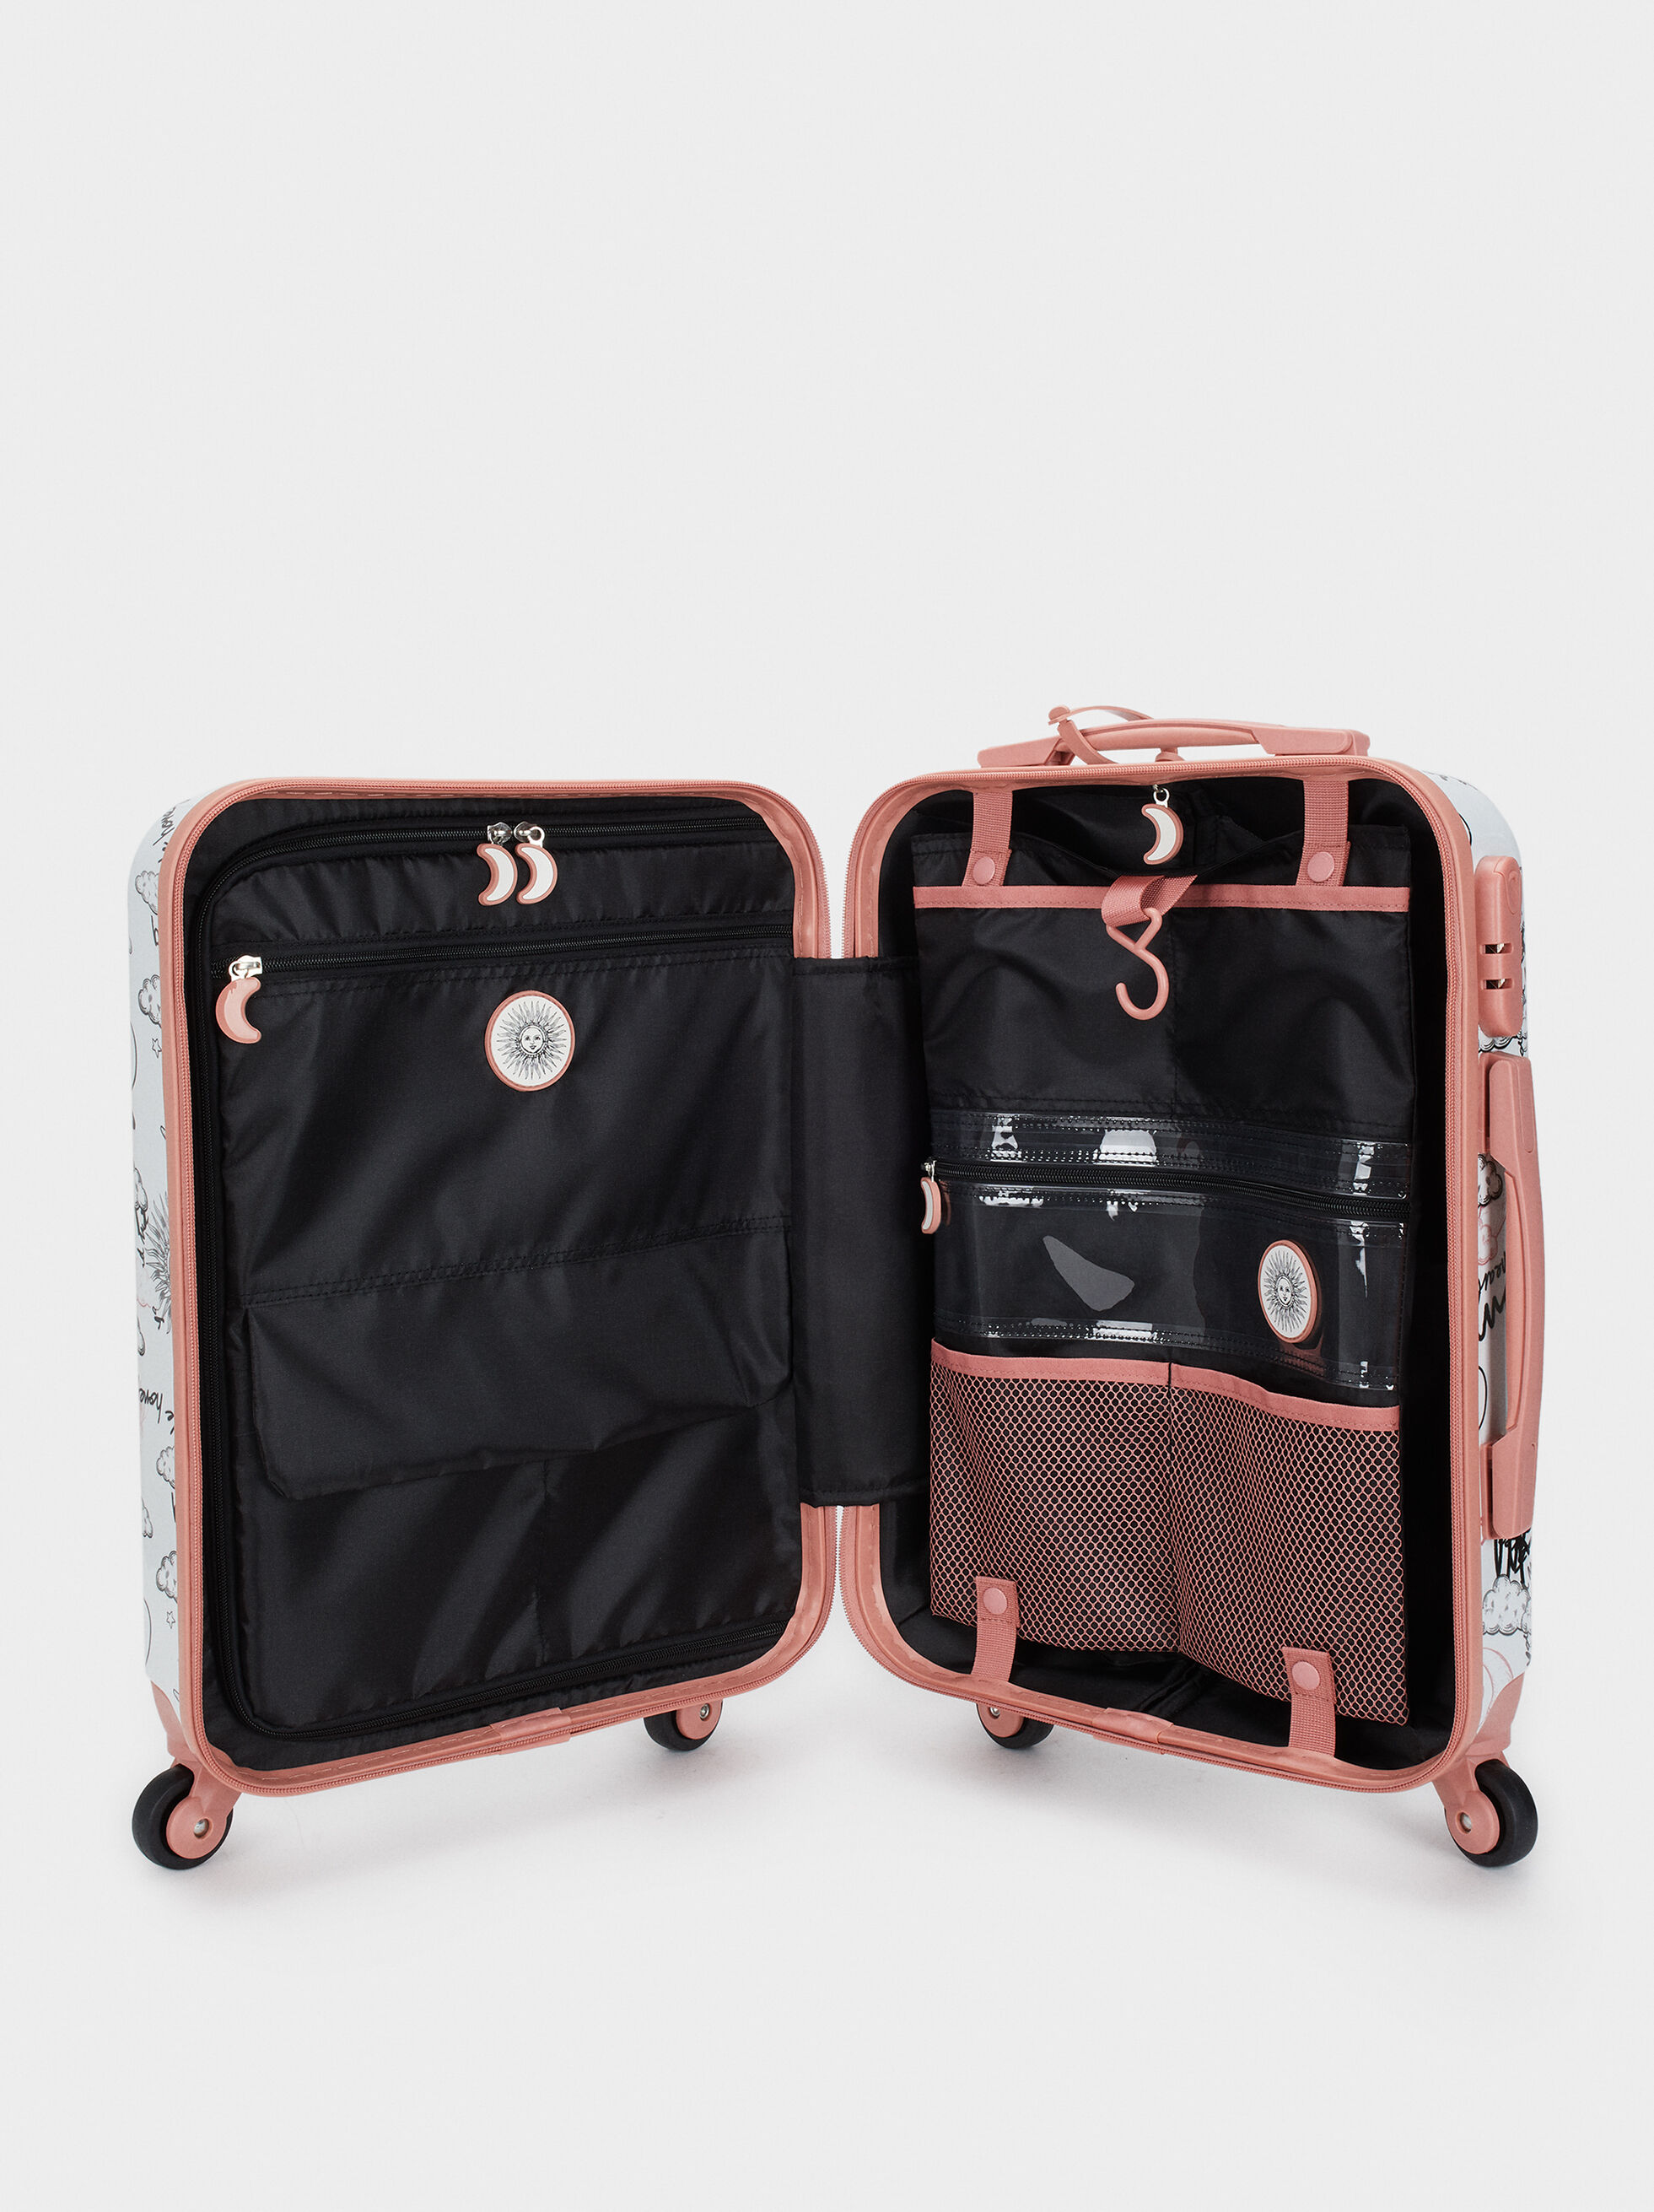 trolley suitcase offers